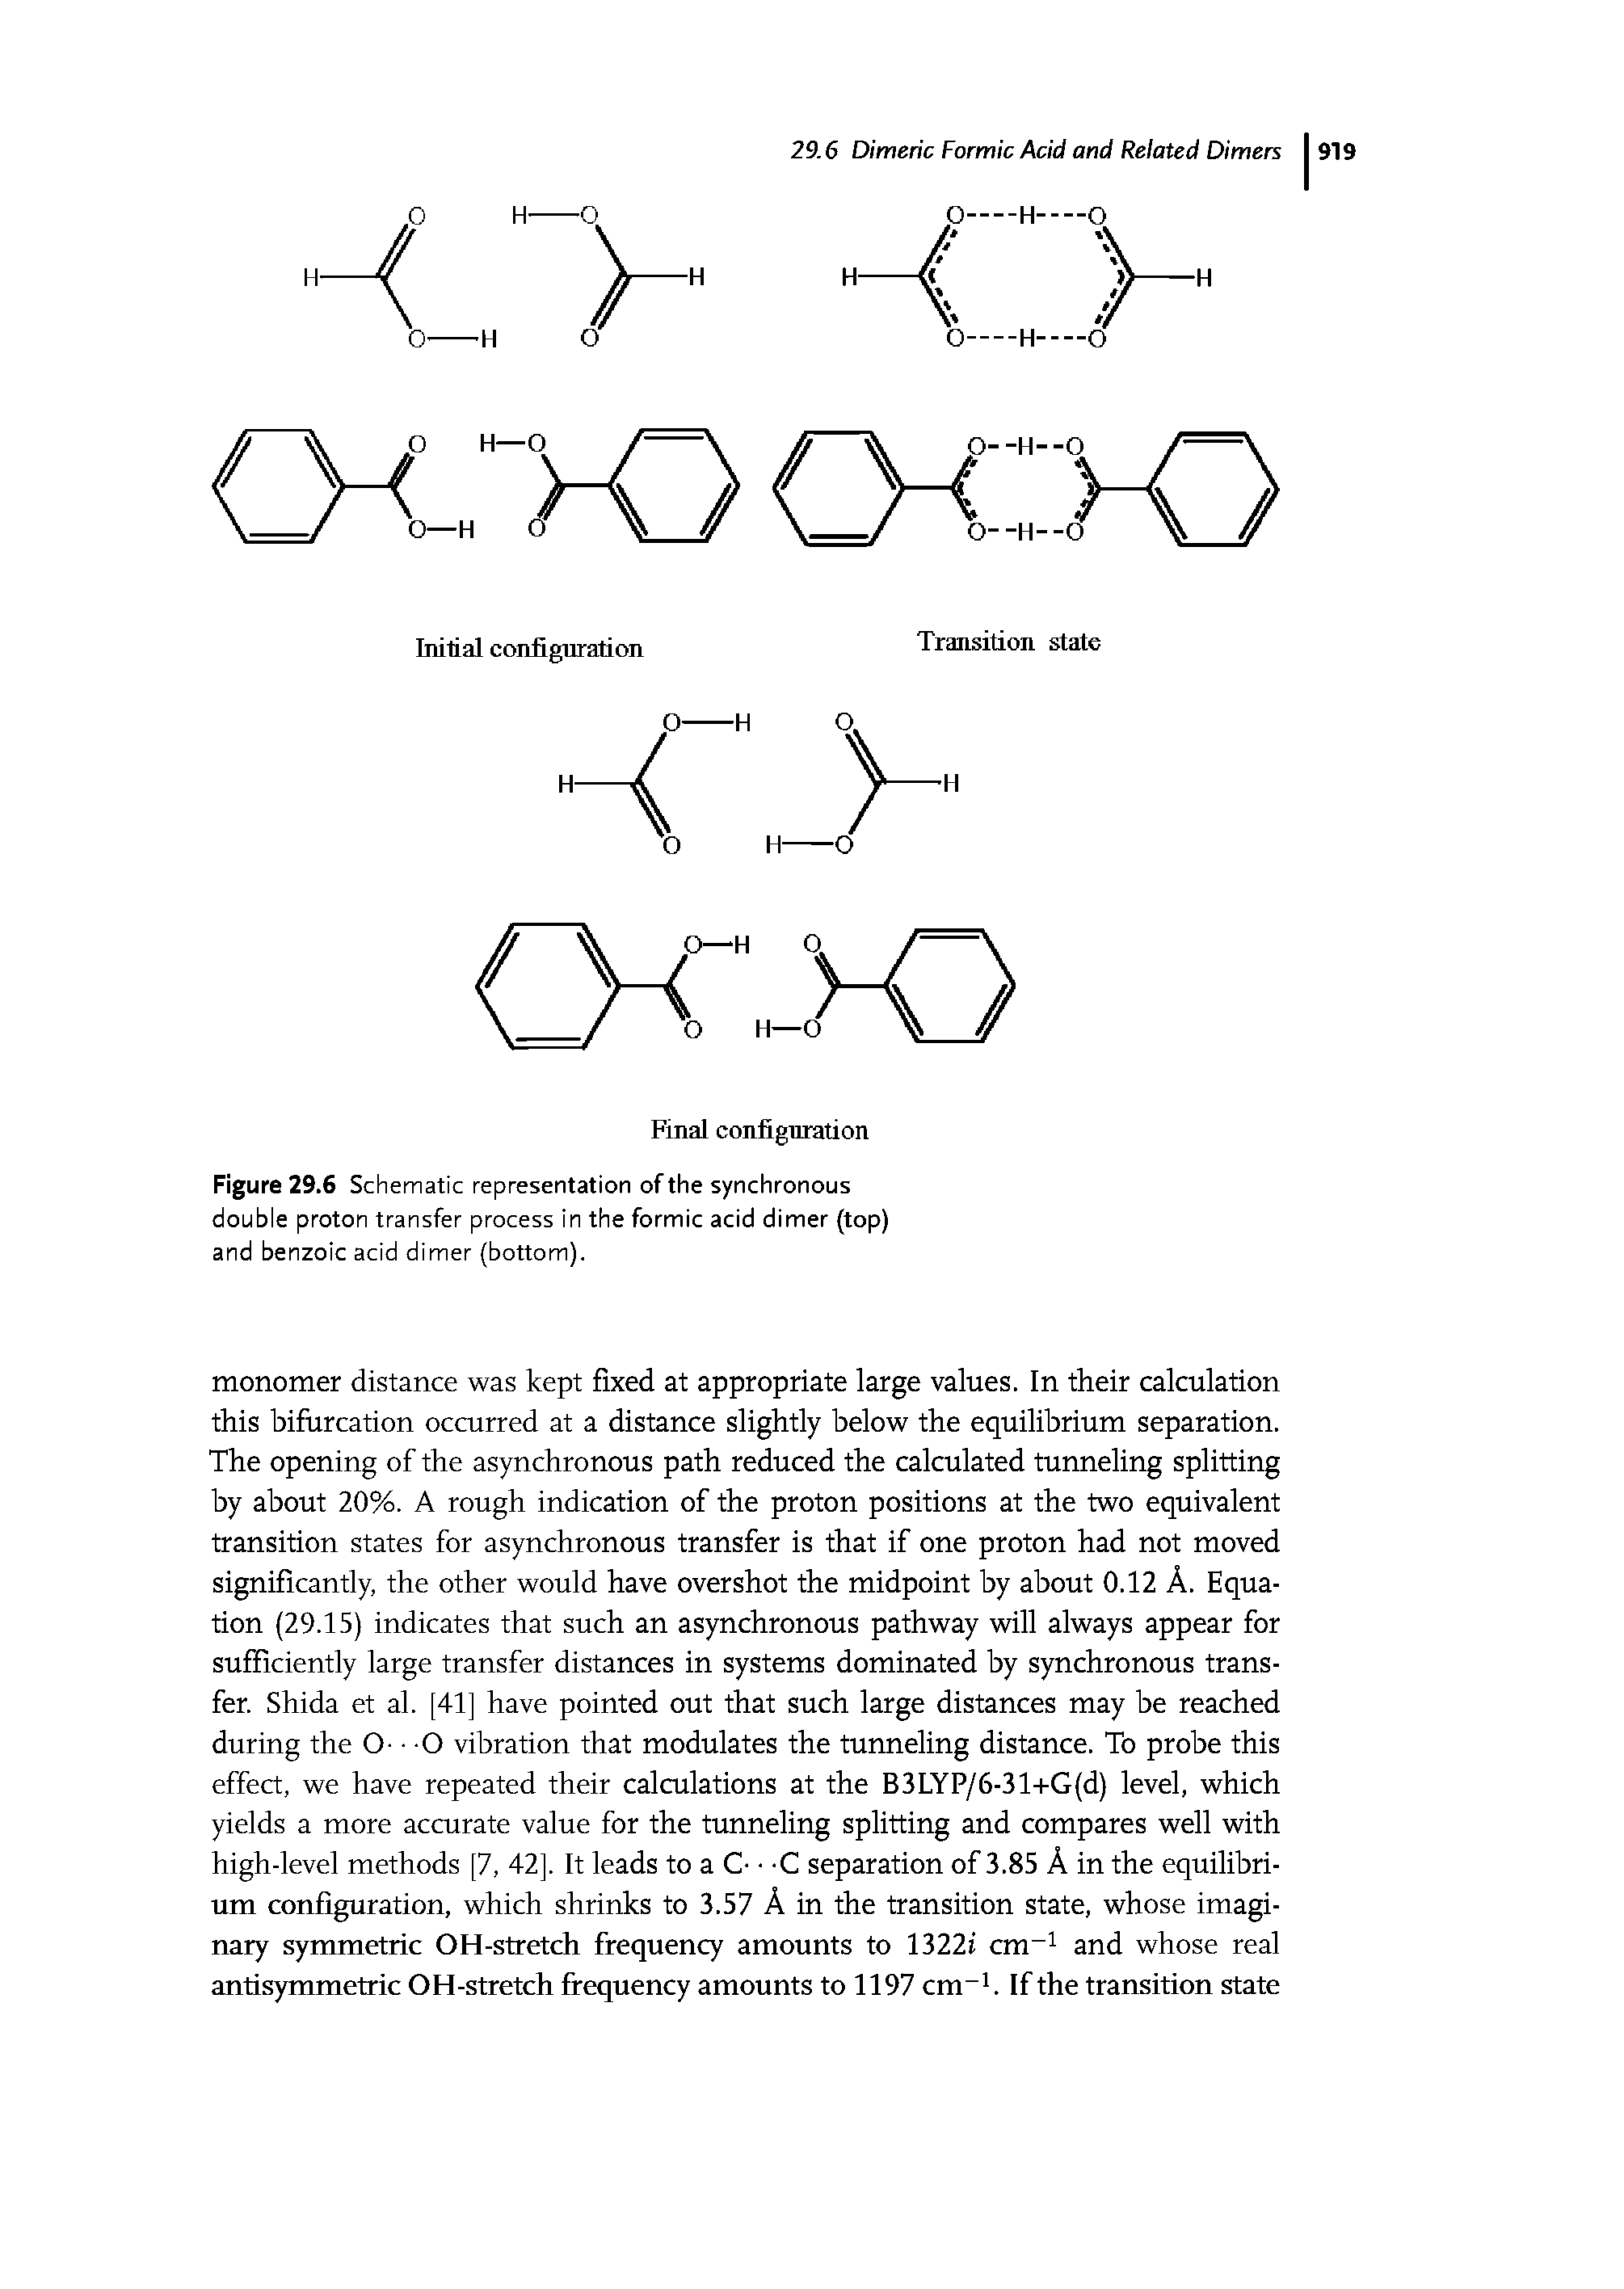 Figure 29.6 Schematic representation of the synchronous double proton transfer process in the formic acid dimer (top) and benzoic acid dimer (bottom).